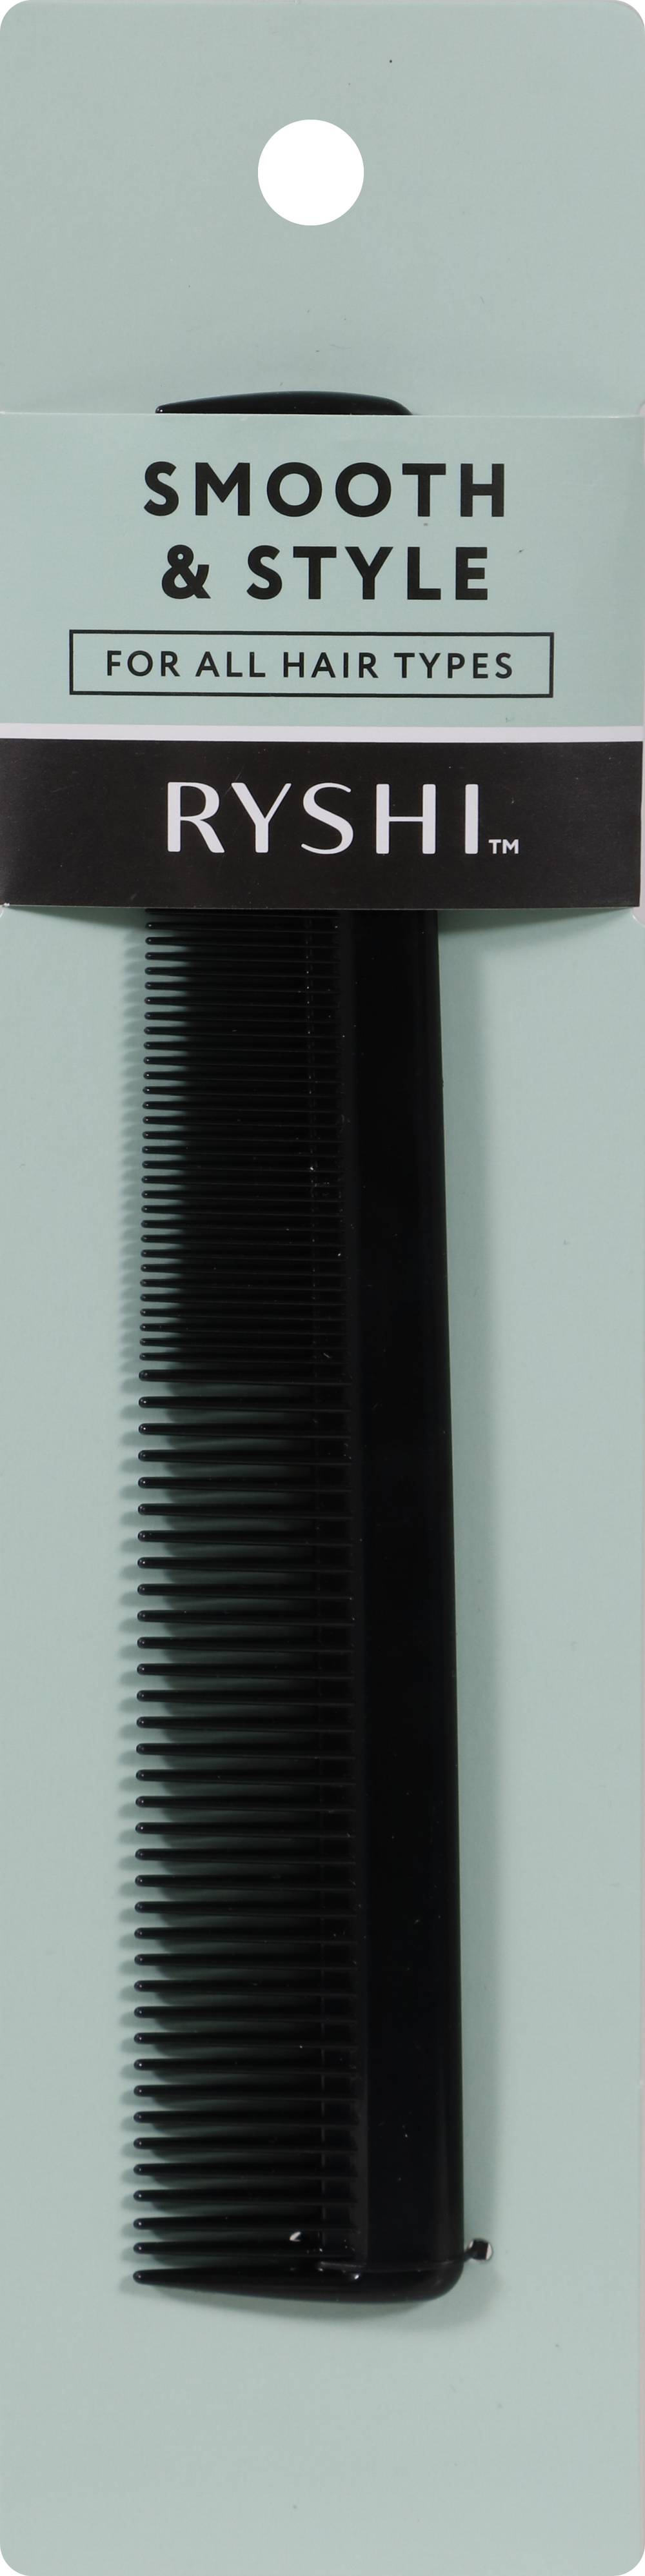 Ryshi Smooth and Style Comb